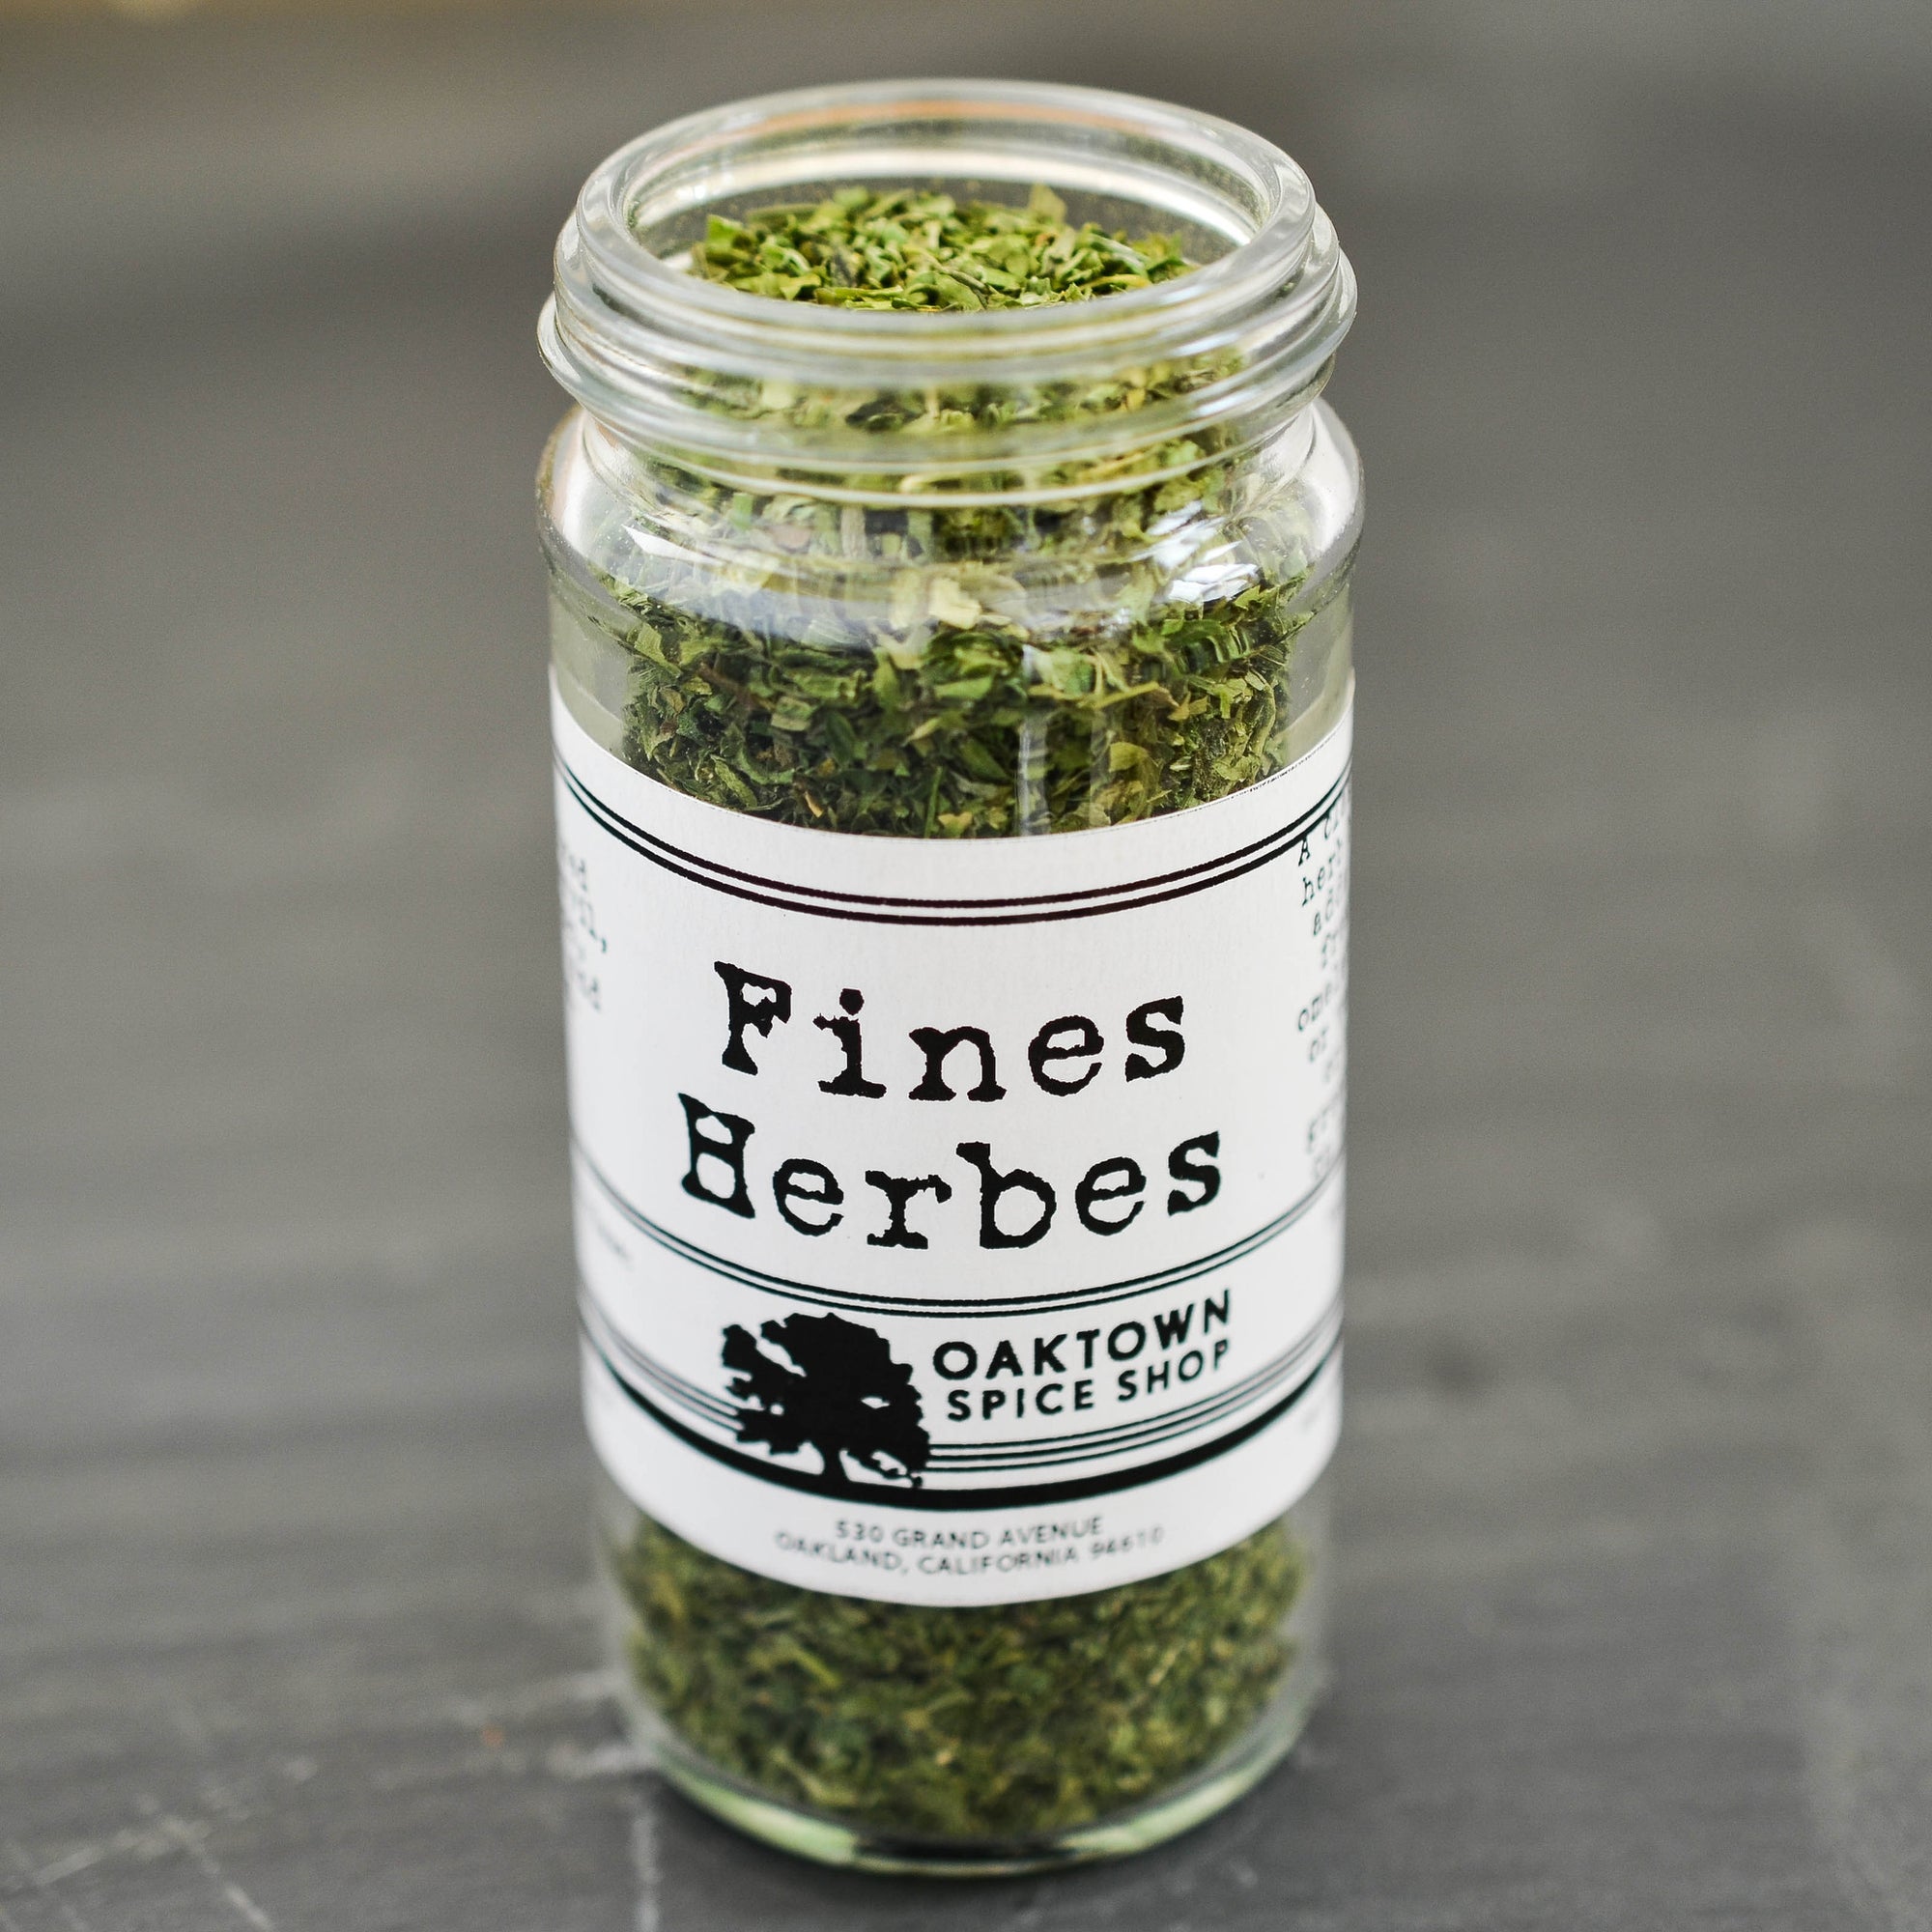 Fines Herbes by Oaktown Spice Shop is hand mixed from Hand mixed from Chervil, Tarragon, Parsley and Chives